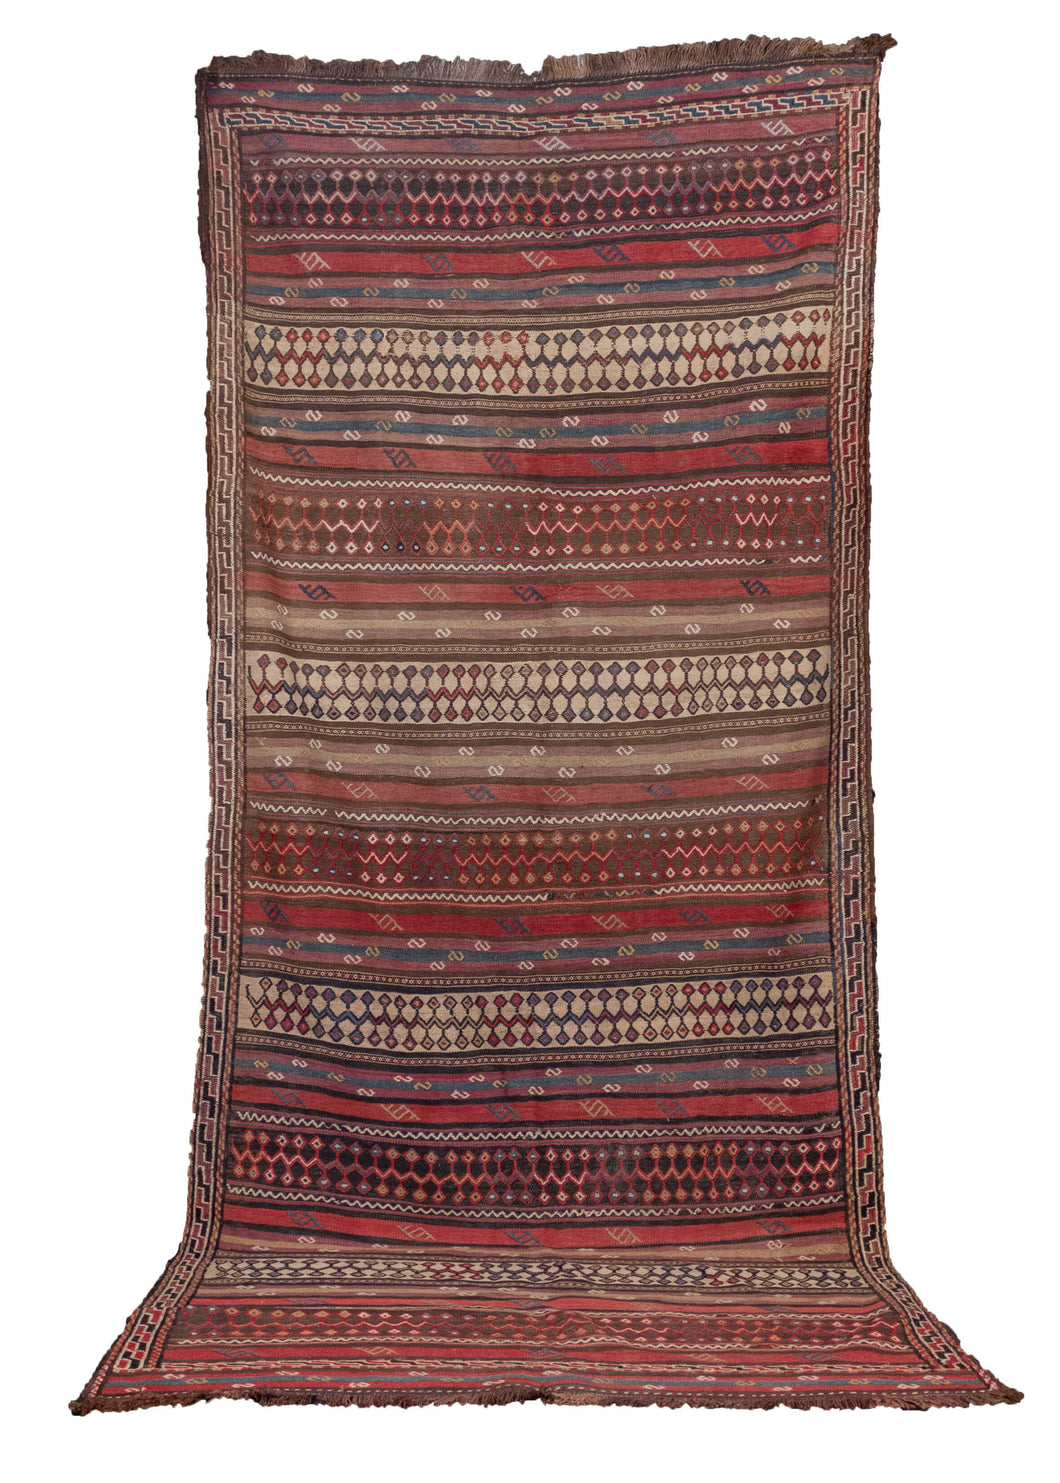 Vintage Northwest kilim handwoven in NW Iran. Featuring a dynamic striped design with embroidered symbols and shapes in a multitude of colors. In very good condition, signs of wear consistent with age. 